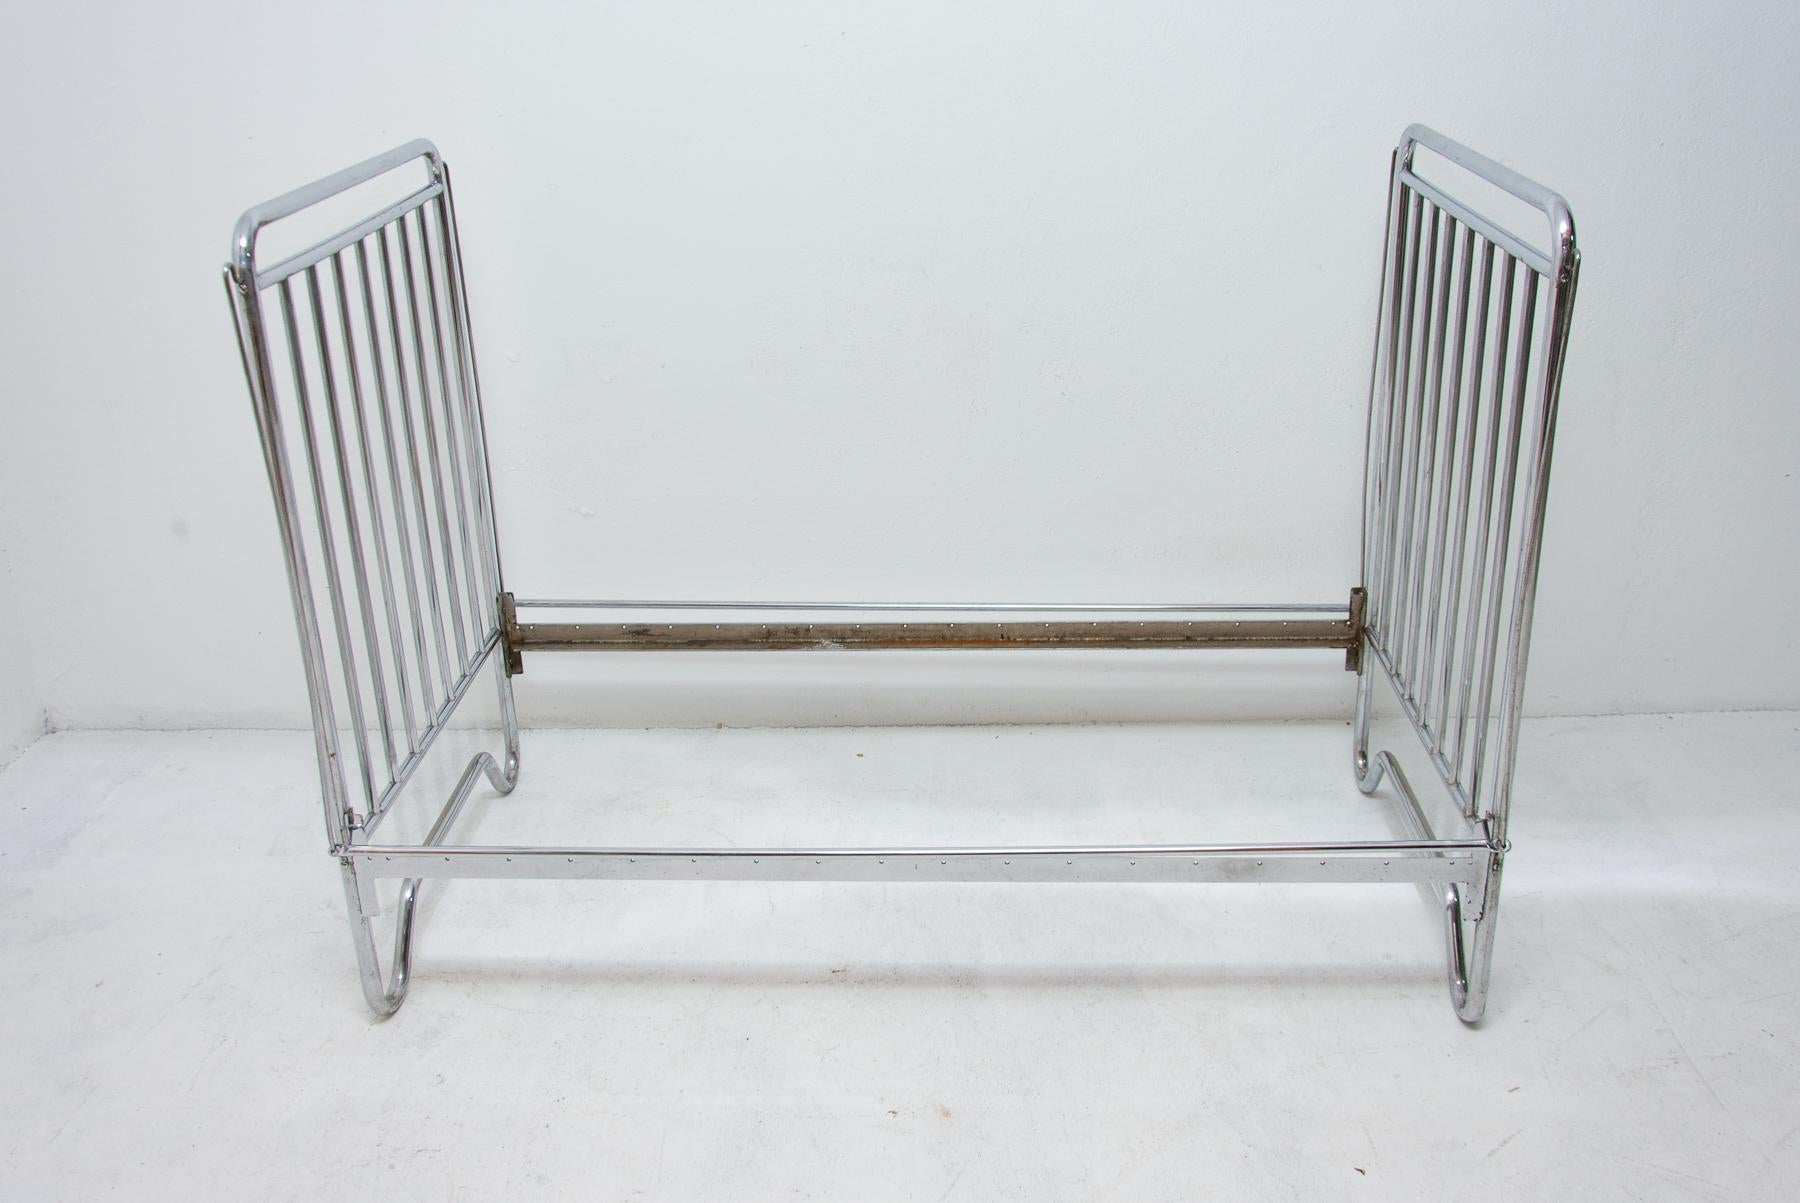 Chromium Plated Childern Bed, Bauhaus Period, 1930s For Sale 7